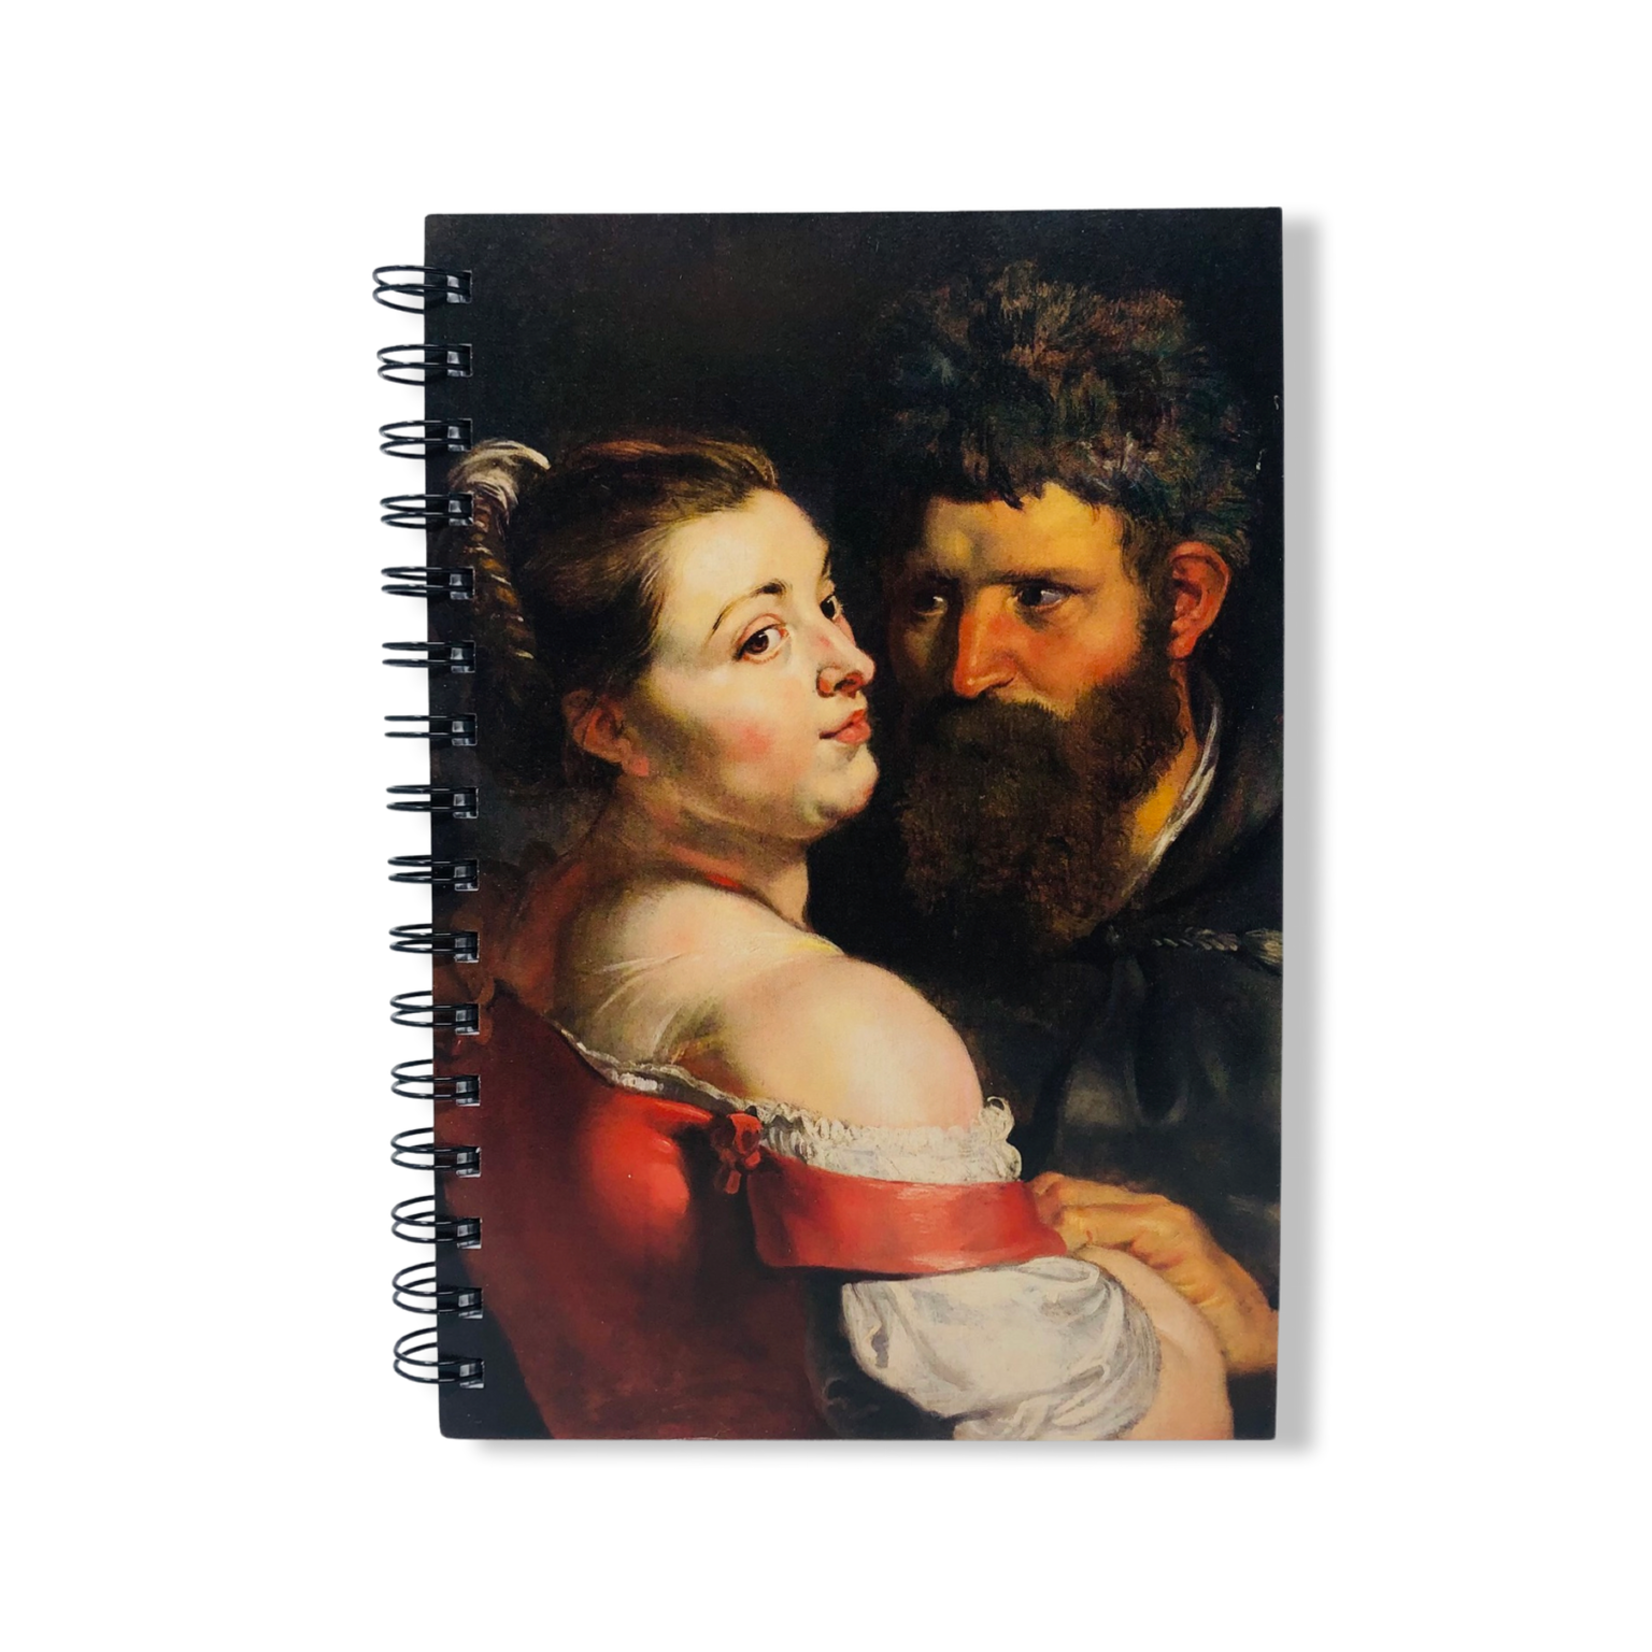 MUSEUM STORE PRODUCTS A SAILOR AND WOMAN EMBRACING SPIRAL NTBK